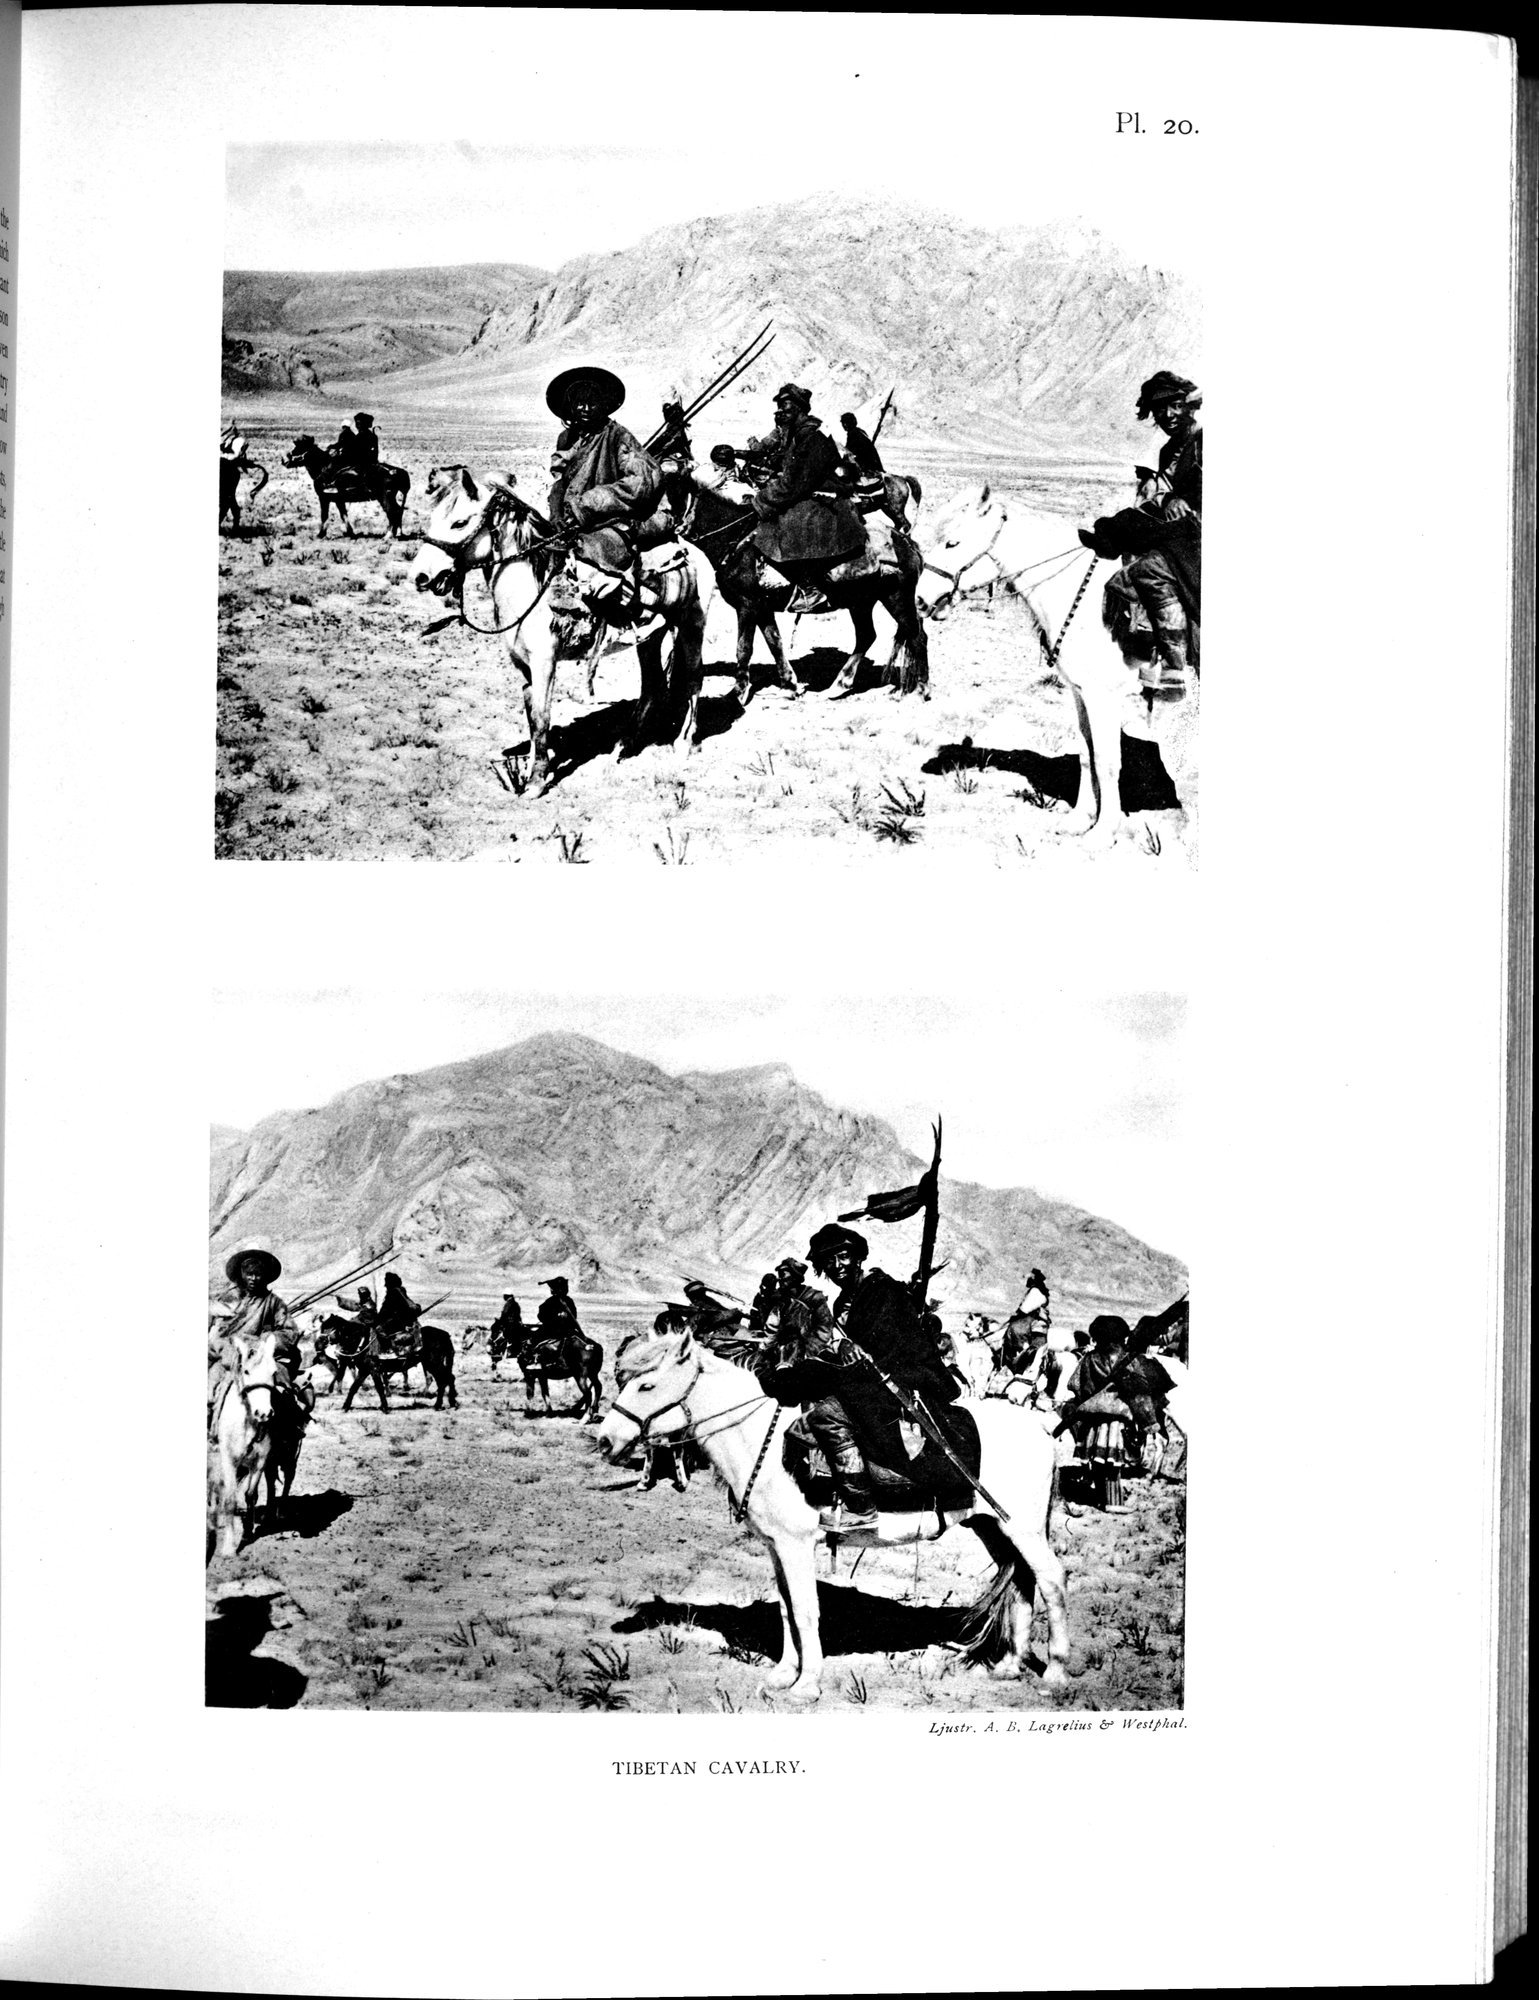 Scientific Results of a Journey in Central Asia, 1899-1902 : vol.4 / 191 ページ（白黒高解像度画像）